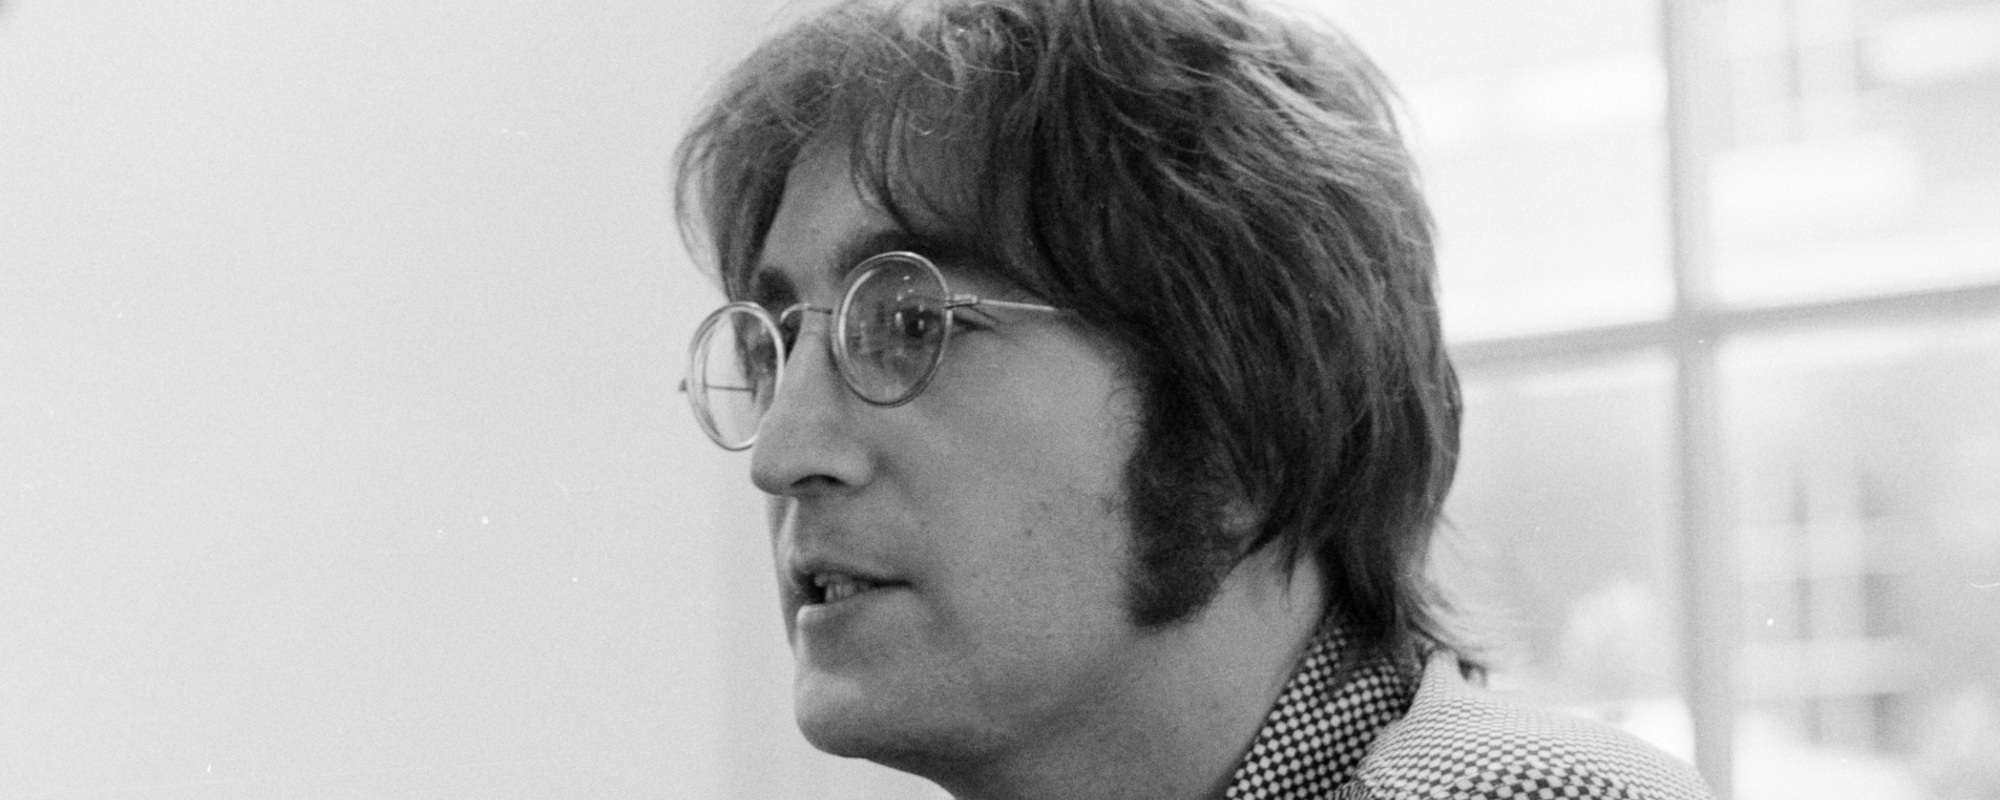 Listen to Unearthed, Mellow “Yellow Submarine” Demo Sung by John Lennon